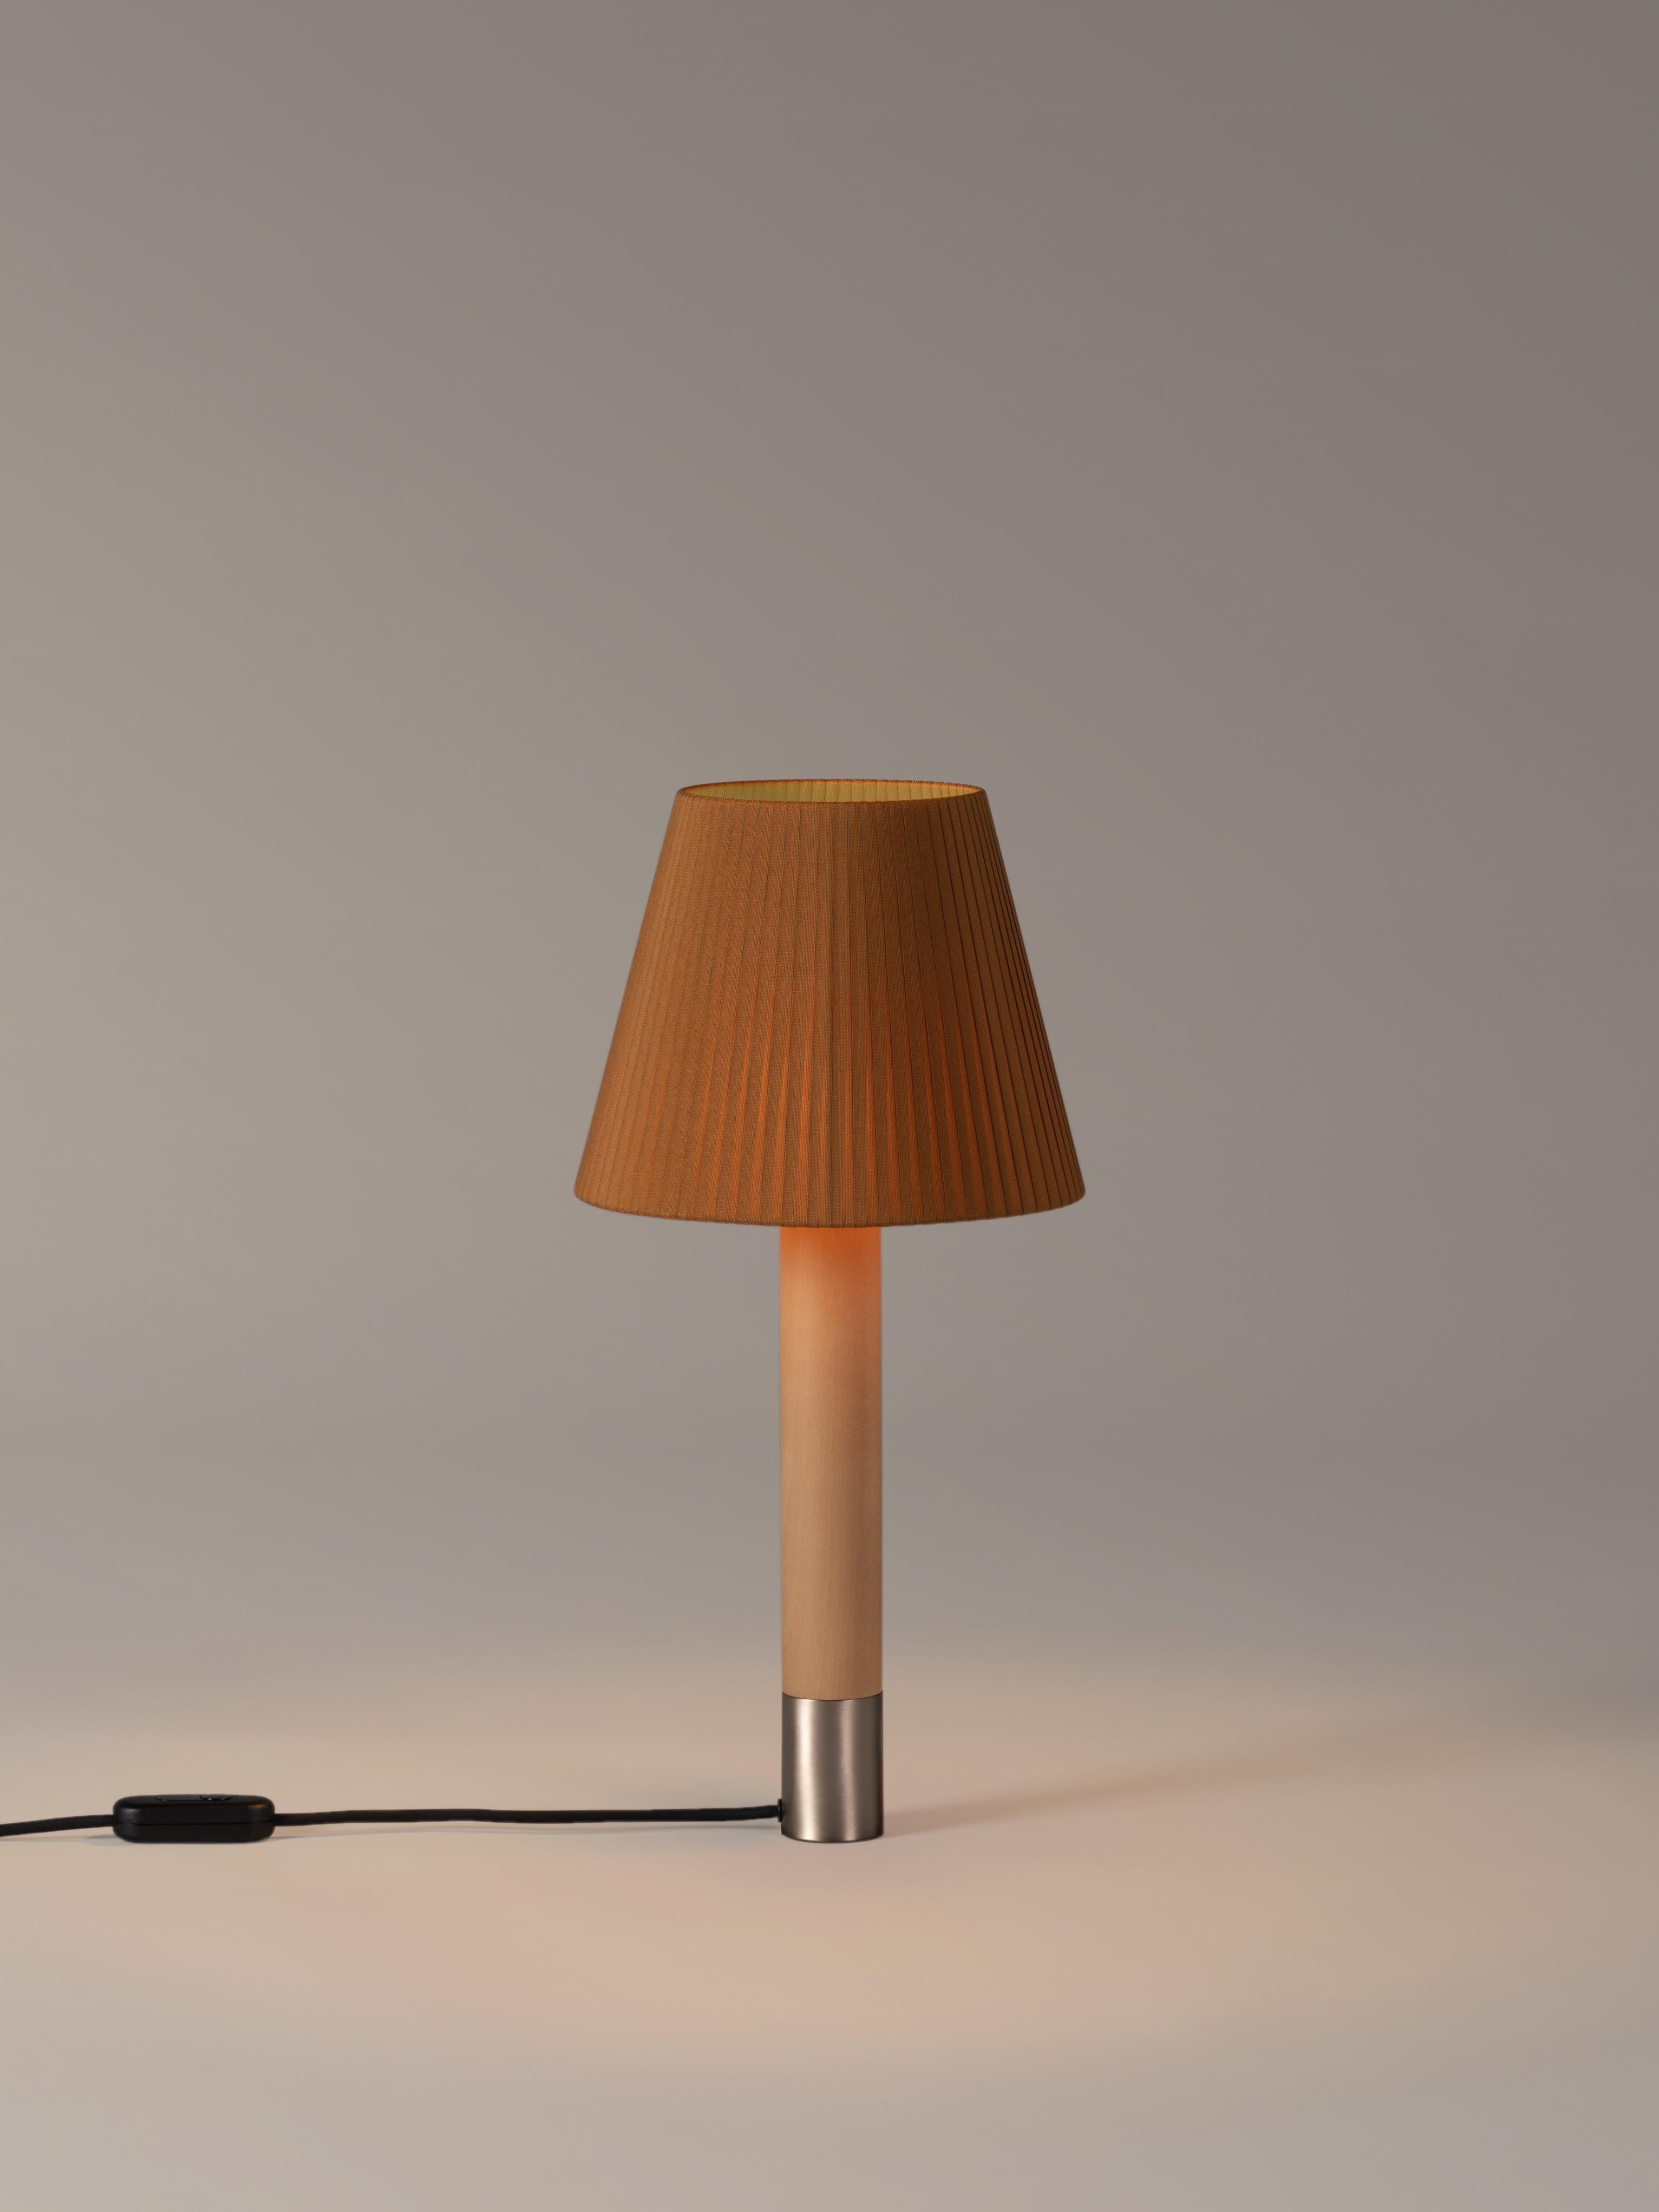 Nickel and Mustard Básica M1 table lamp by Santiago Roqueta, Santa & Cole
Dimensions: D 25 x H 52 cm
Materials: Nickel, birch wood, ribbon.
Available in other shade colors and with or without the stabilizing disc.
Available in nickel or